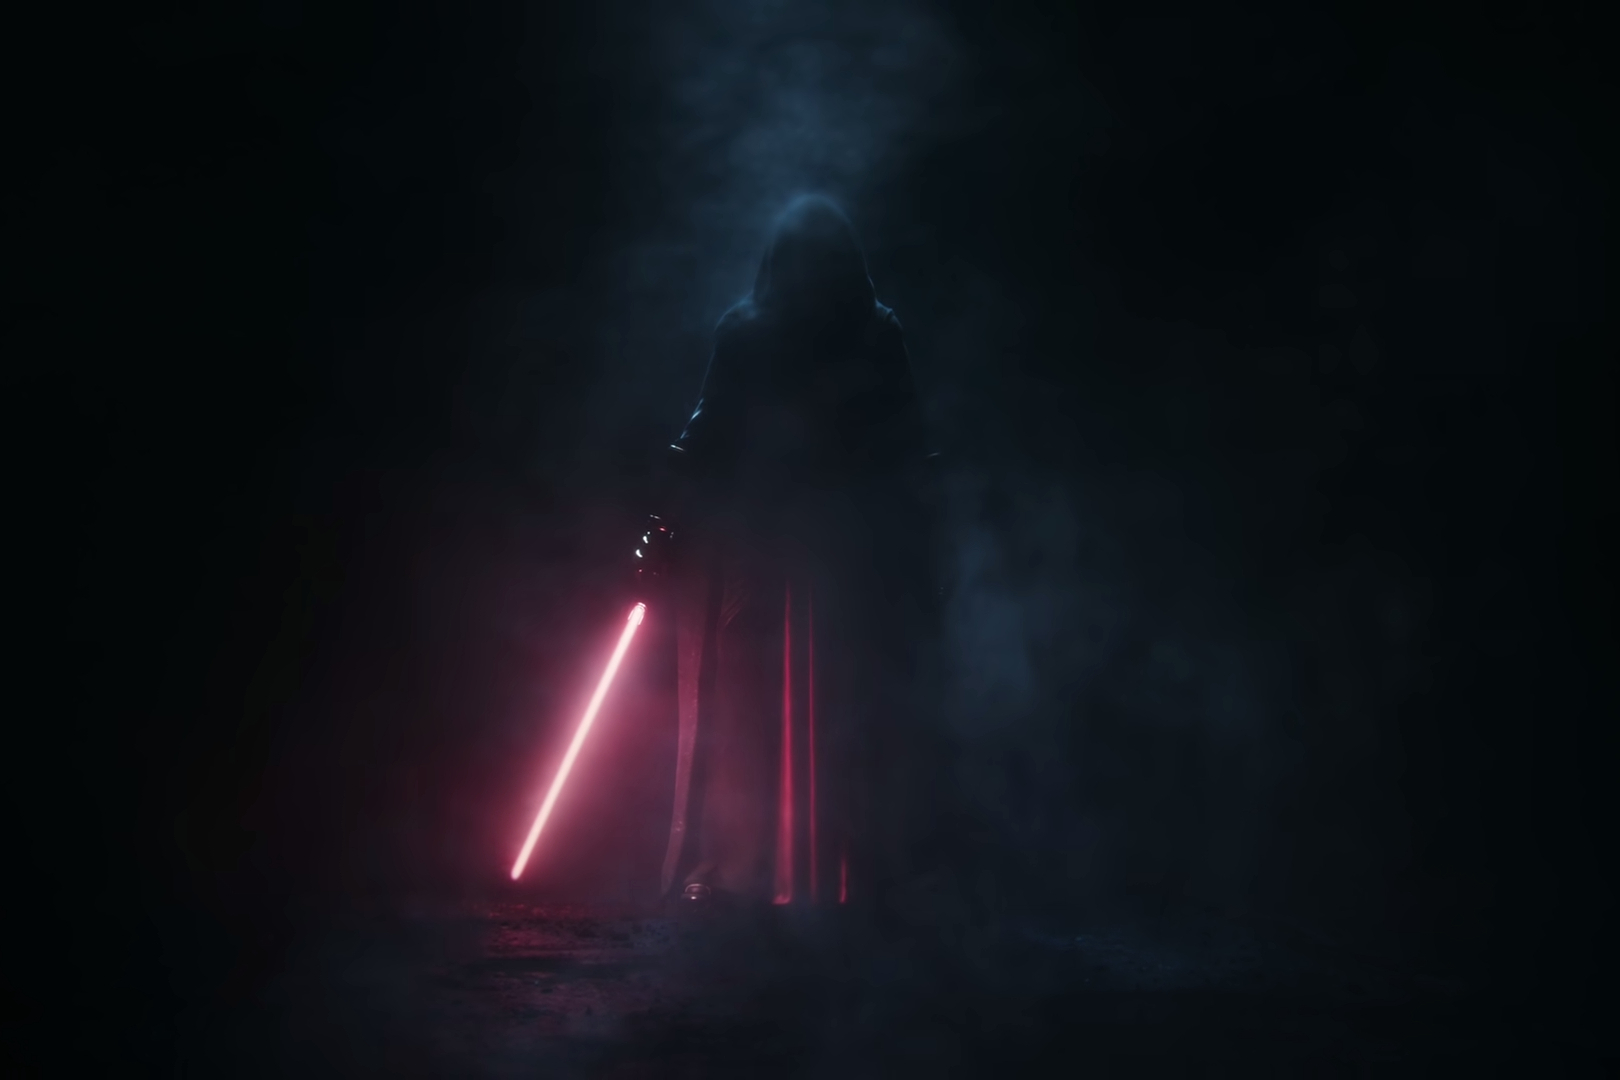 Um Lorde Sith no trailer de Star Wars: Knights of the Old Republic Remake.